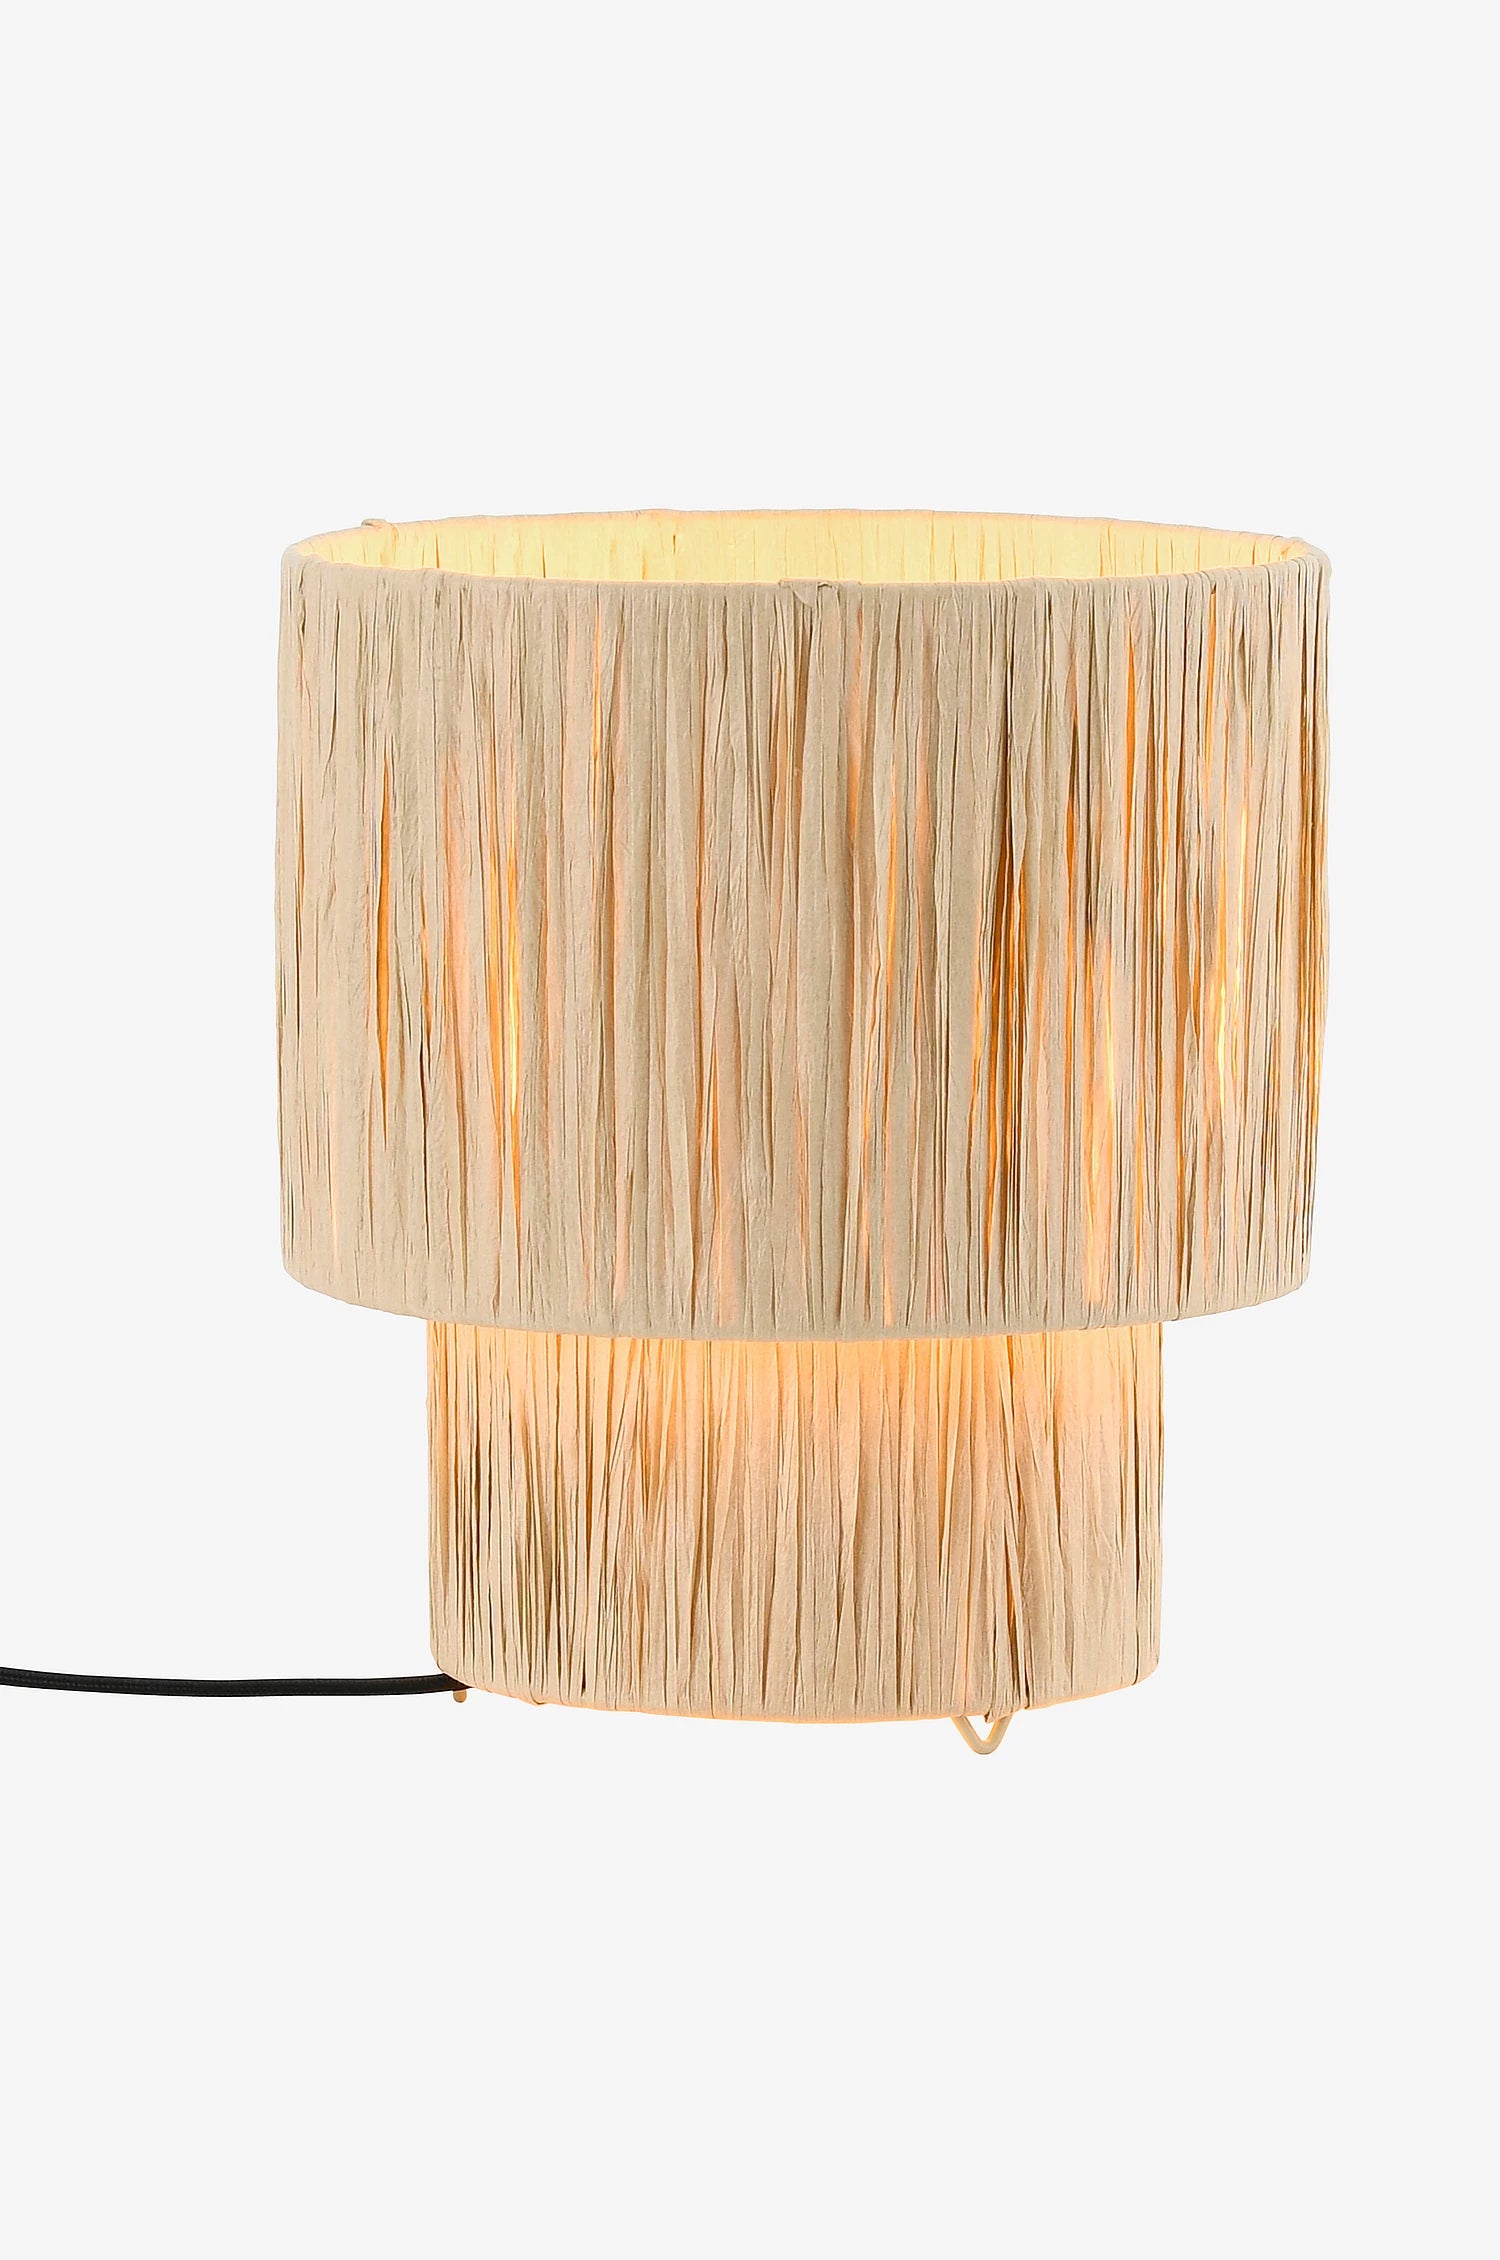 Rattan Table lamp for Living room | Bamboo Bedside table lamp | Cane Table lamp -Tanya - Akway